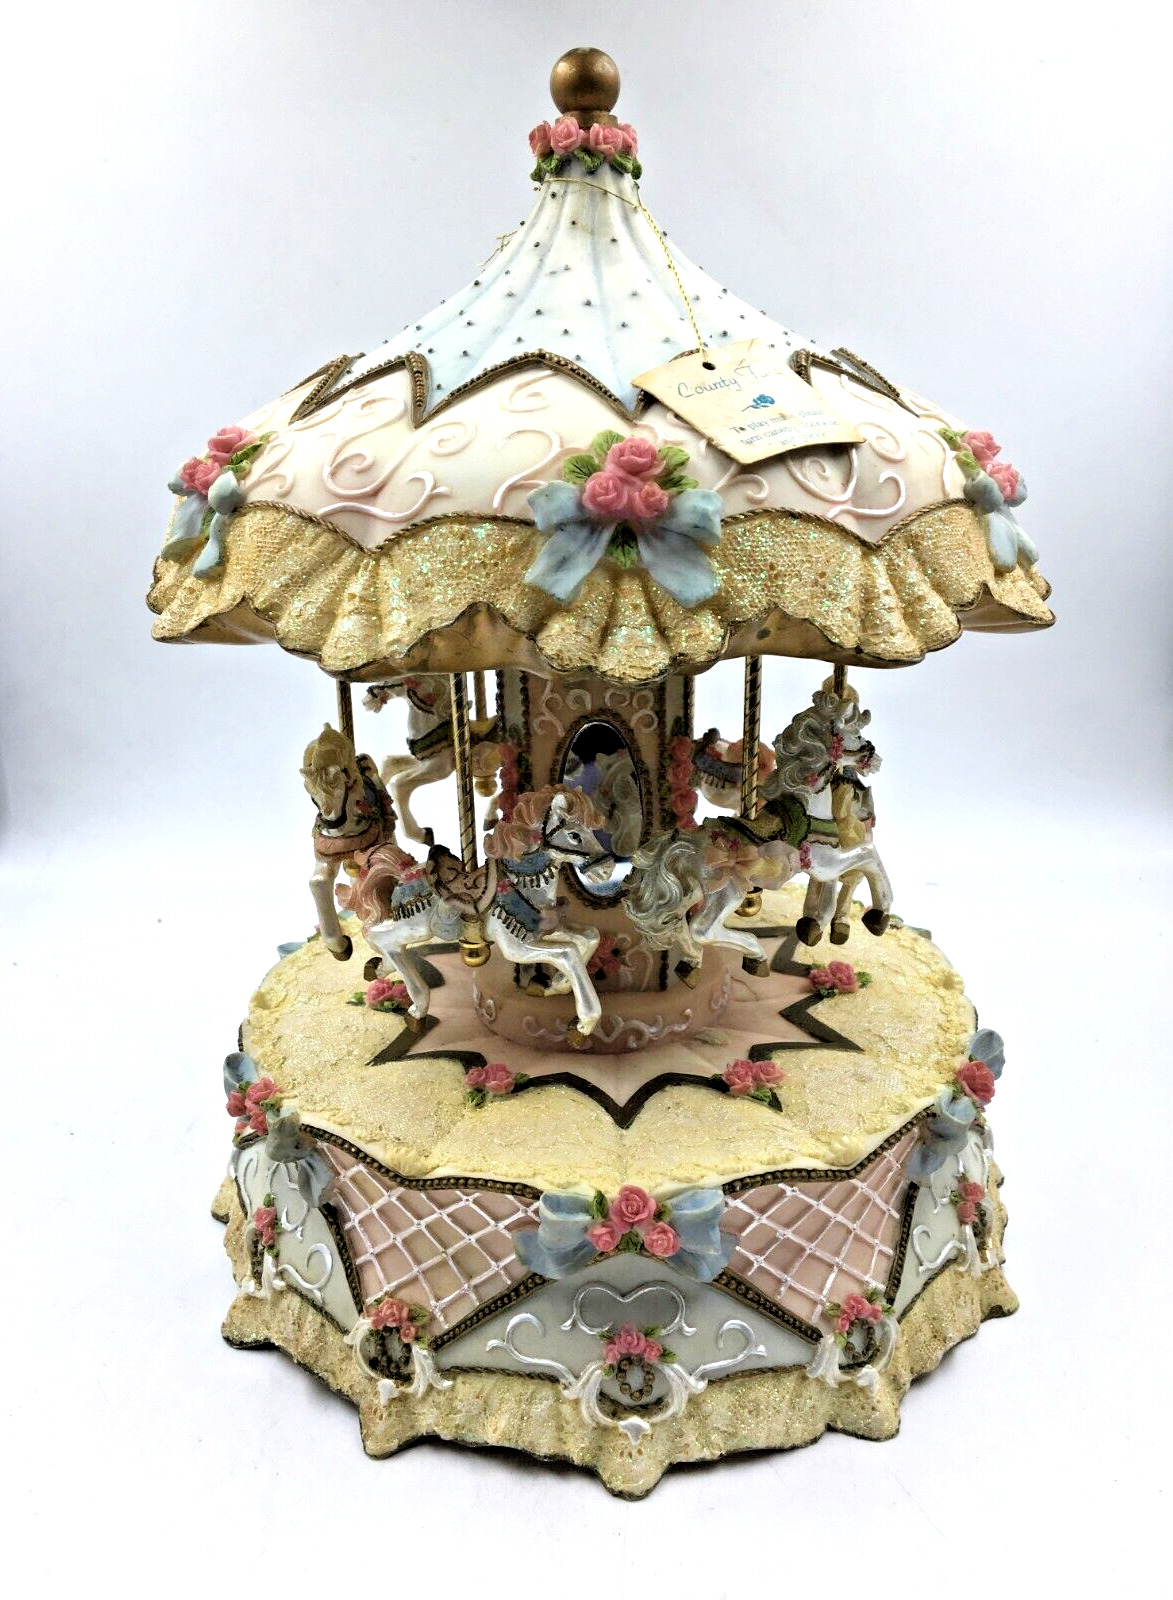 VINTAGE HERITAGE HOUSE 6 HORSE CAROUSEL ~ MUSIC BOX IS OVERWOUND DOES NOT WORK